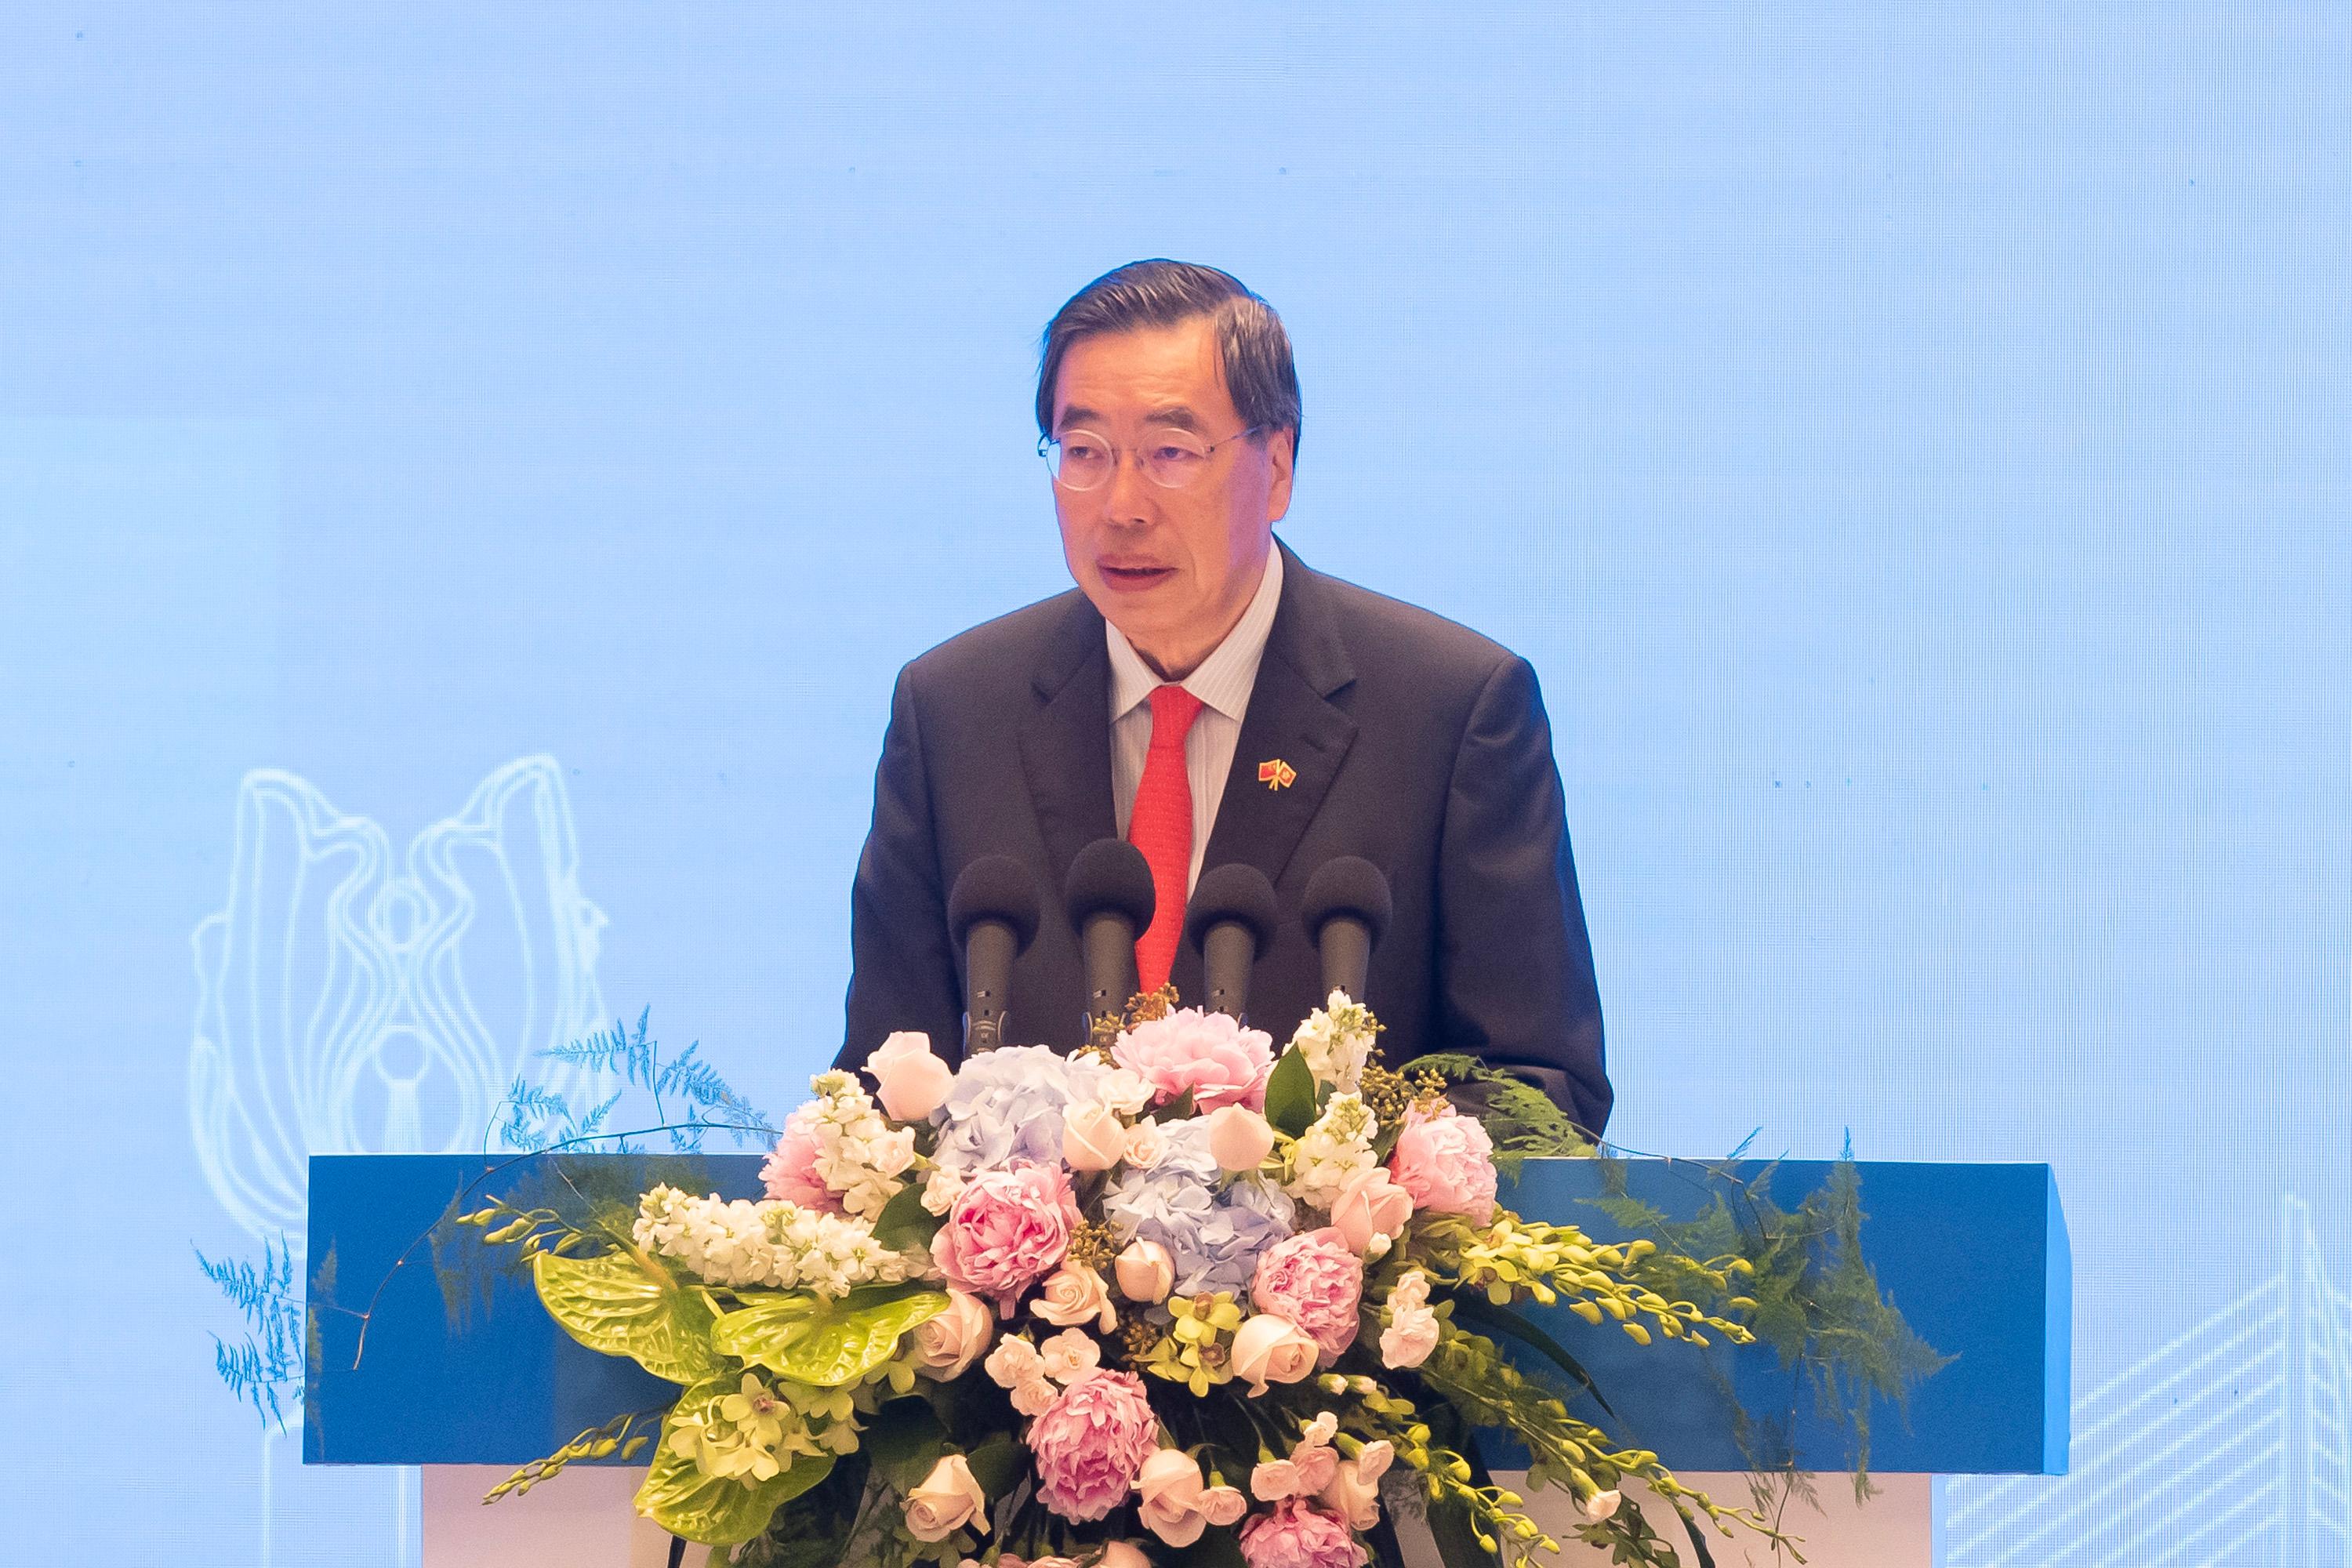 The delegation of the Government and the Legislative Council, led by the Chief Executive, Mr John Lee, concluded the four-day duty visit in the Guangdong-Hong Kong-Macao Greater Bay Area today (April 24). Photo shows the President of LegCo, Mr Andrew Leung, delivering a speech at a luncheon attended by the delegation and leaders of the Guangzhou Municipal Government.